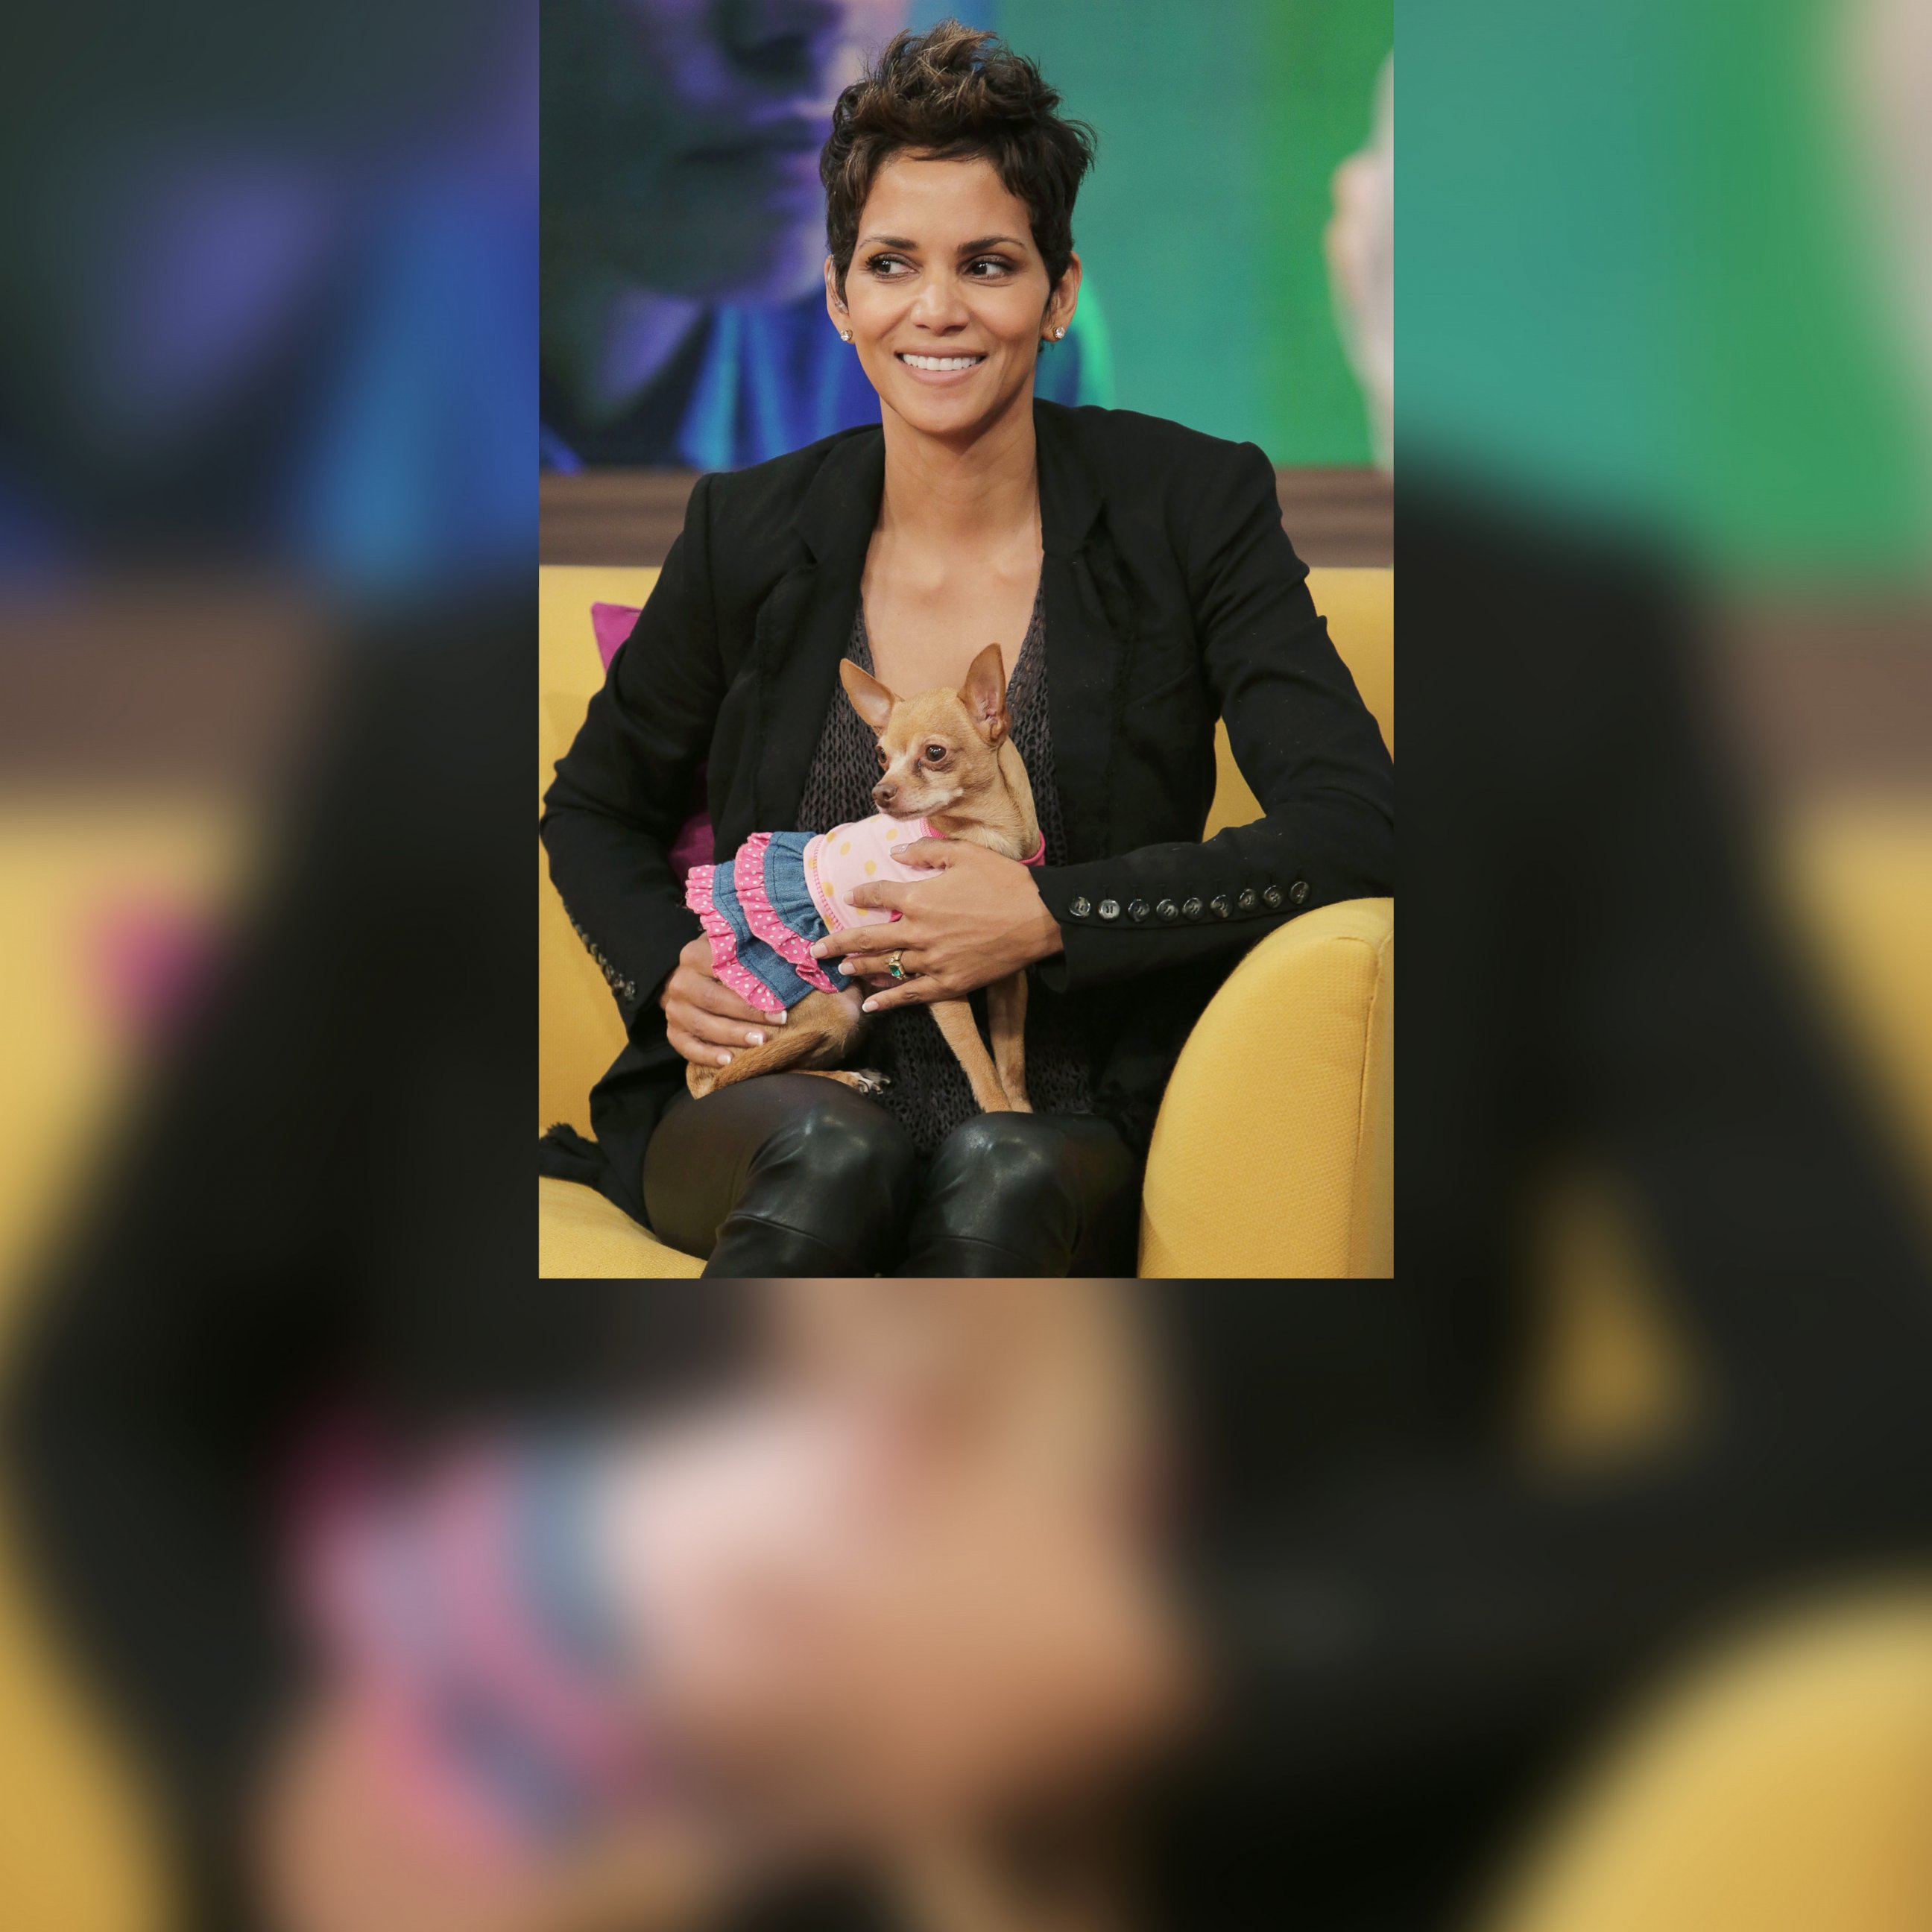 PHOTO: Halle Berry appears on Univision's Despierta America to promote her film "The Call" at Univision Headquarters on Feb. 27, 2013 in Miami, Fla.